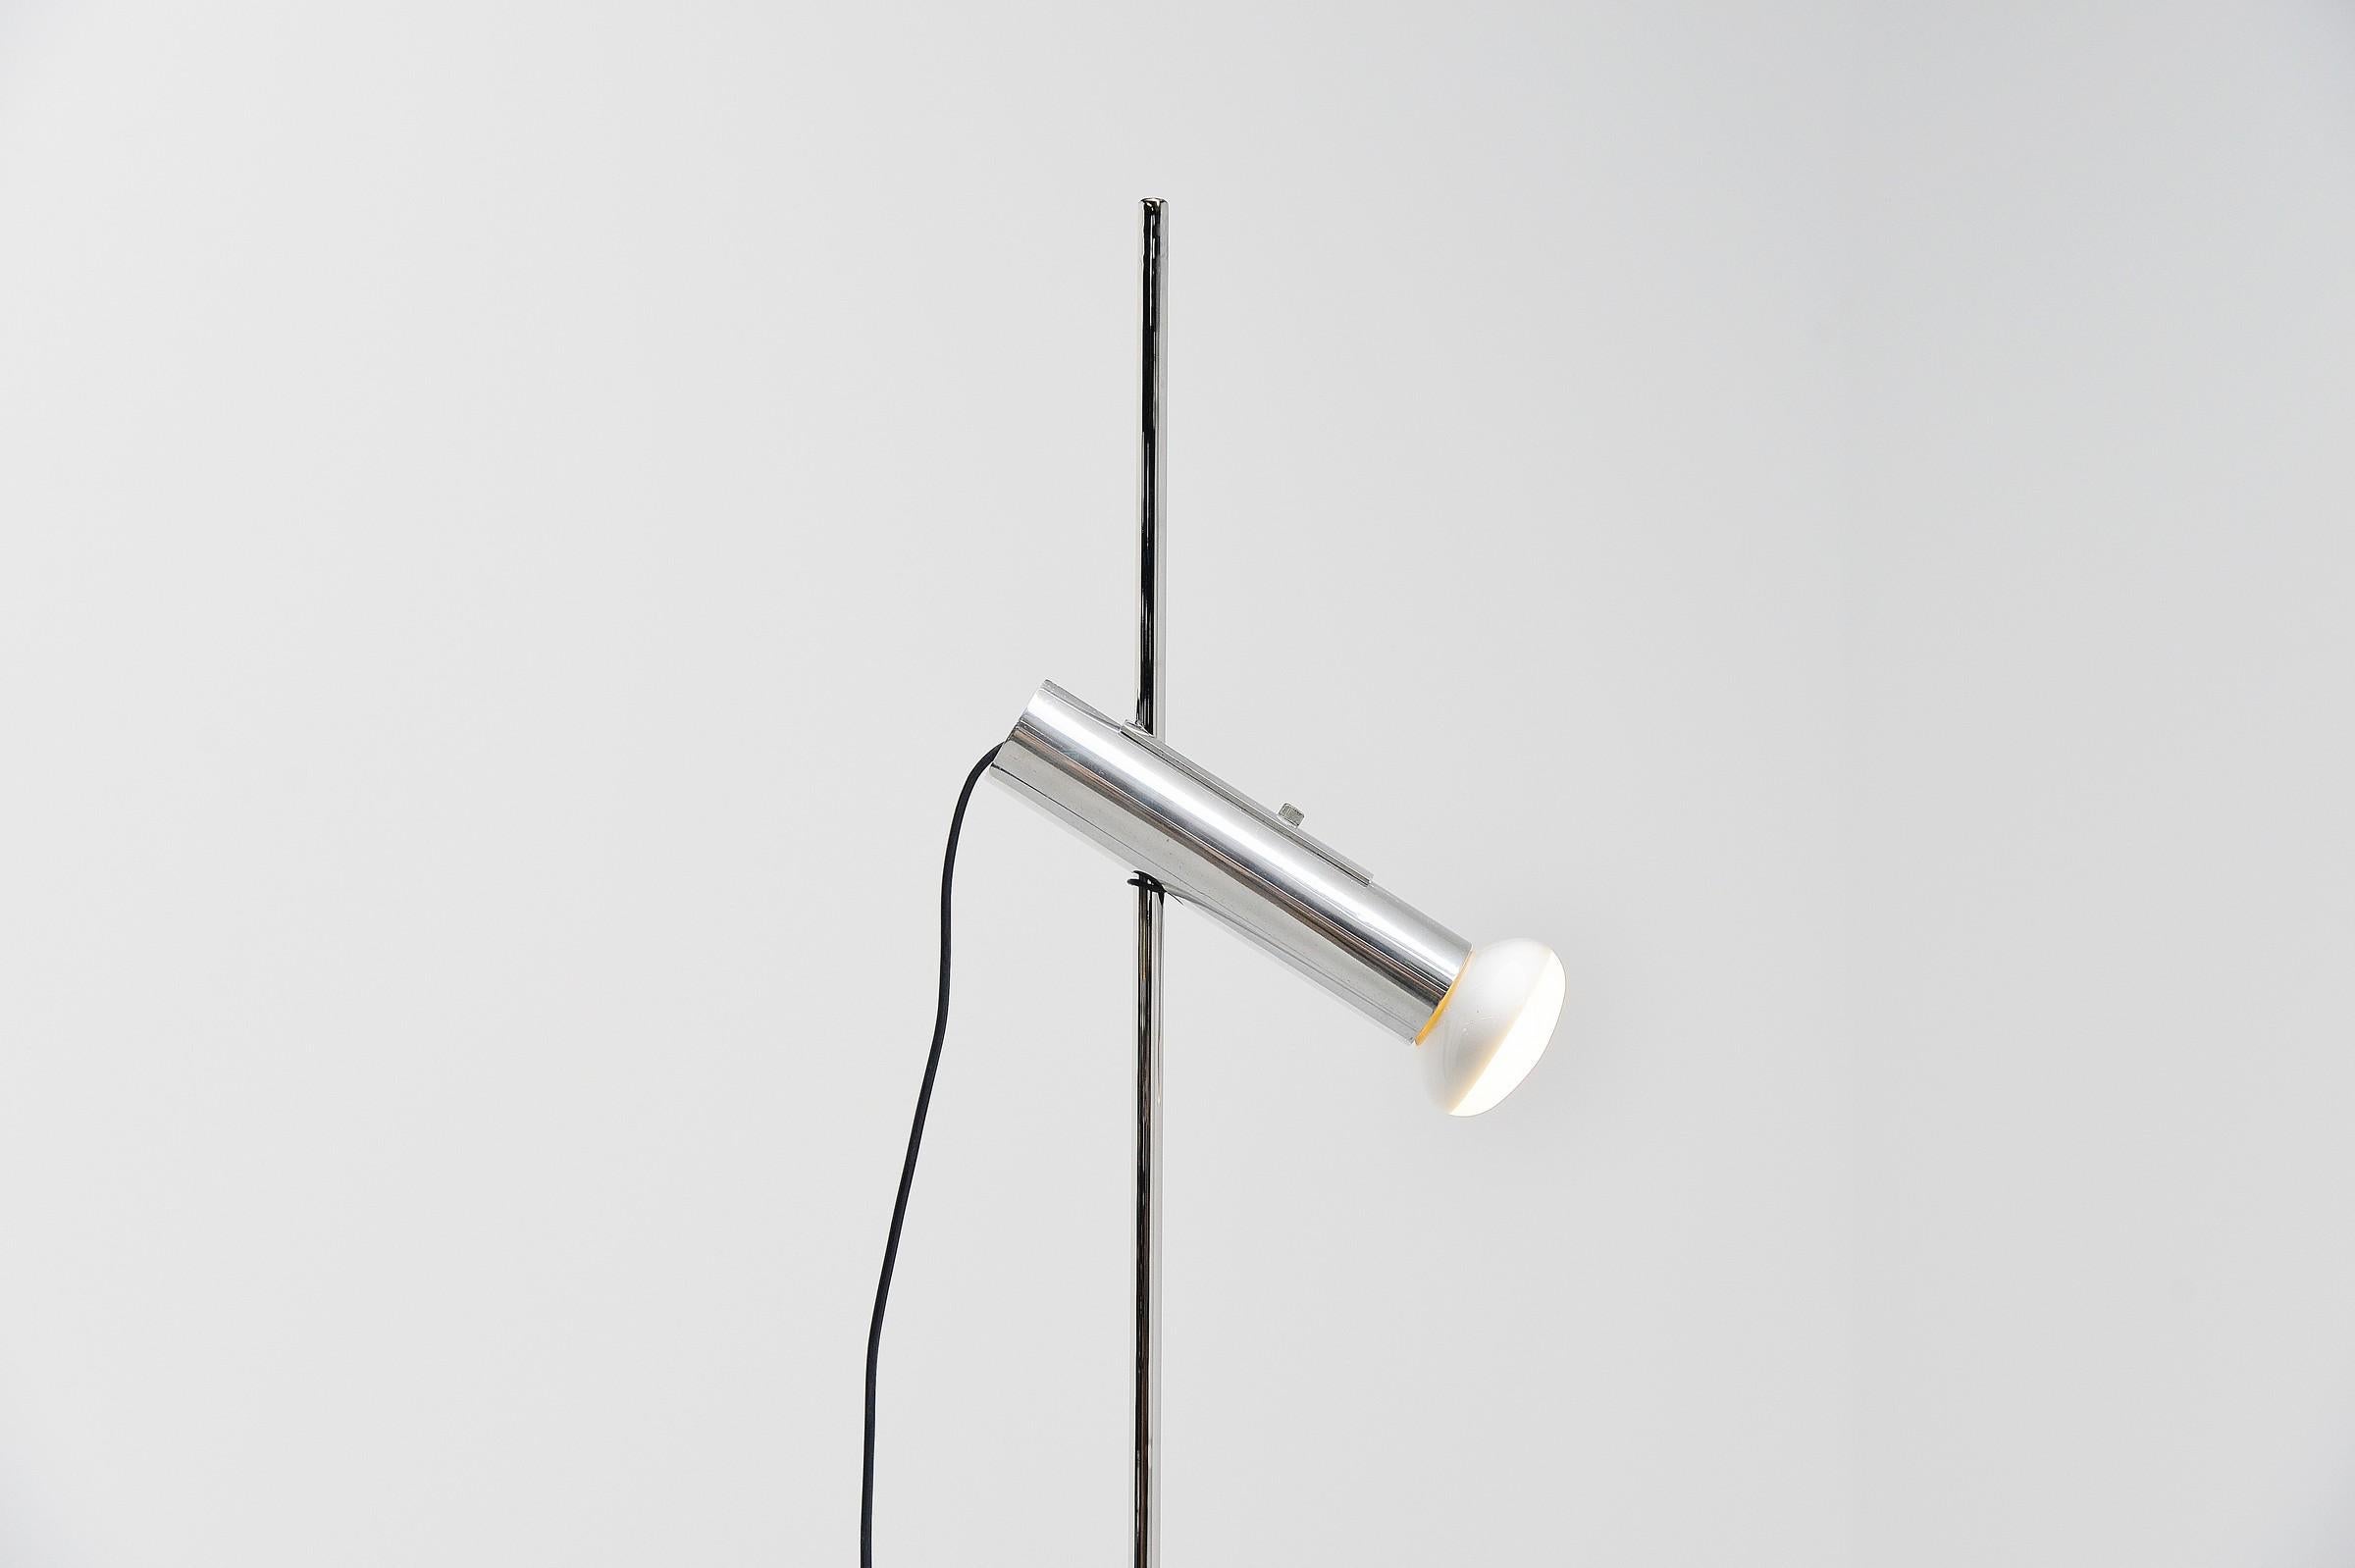 Minimalist floor lamp designed by Gino Sarfatti and manufactured by Arteluce, Italy 1957. This minimal floor lamp has a visible light bulb. Sleeve in polished or lacquered aluminium that moves in all directions and slides along the stem. Rubber